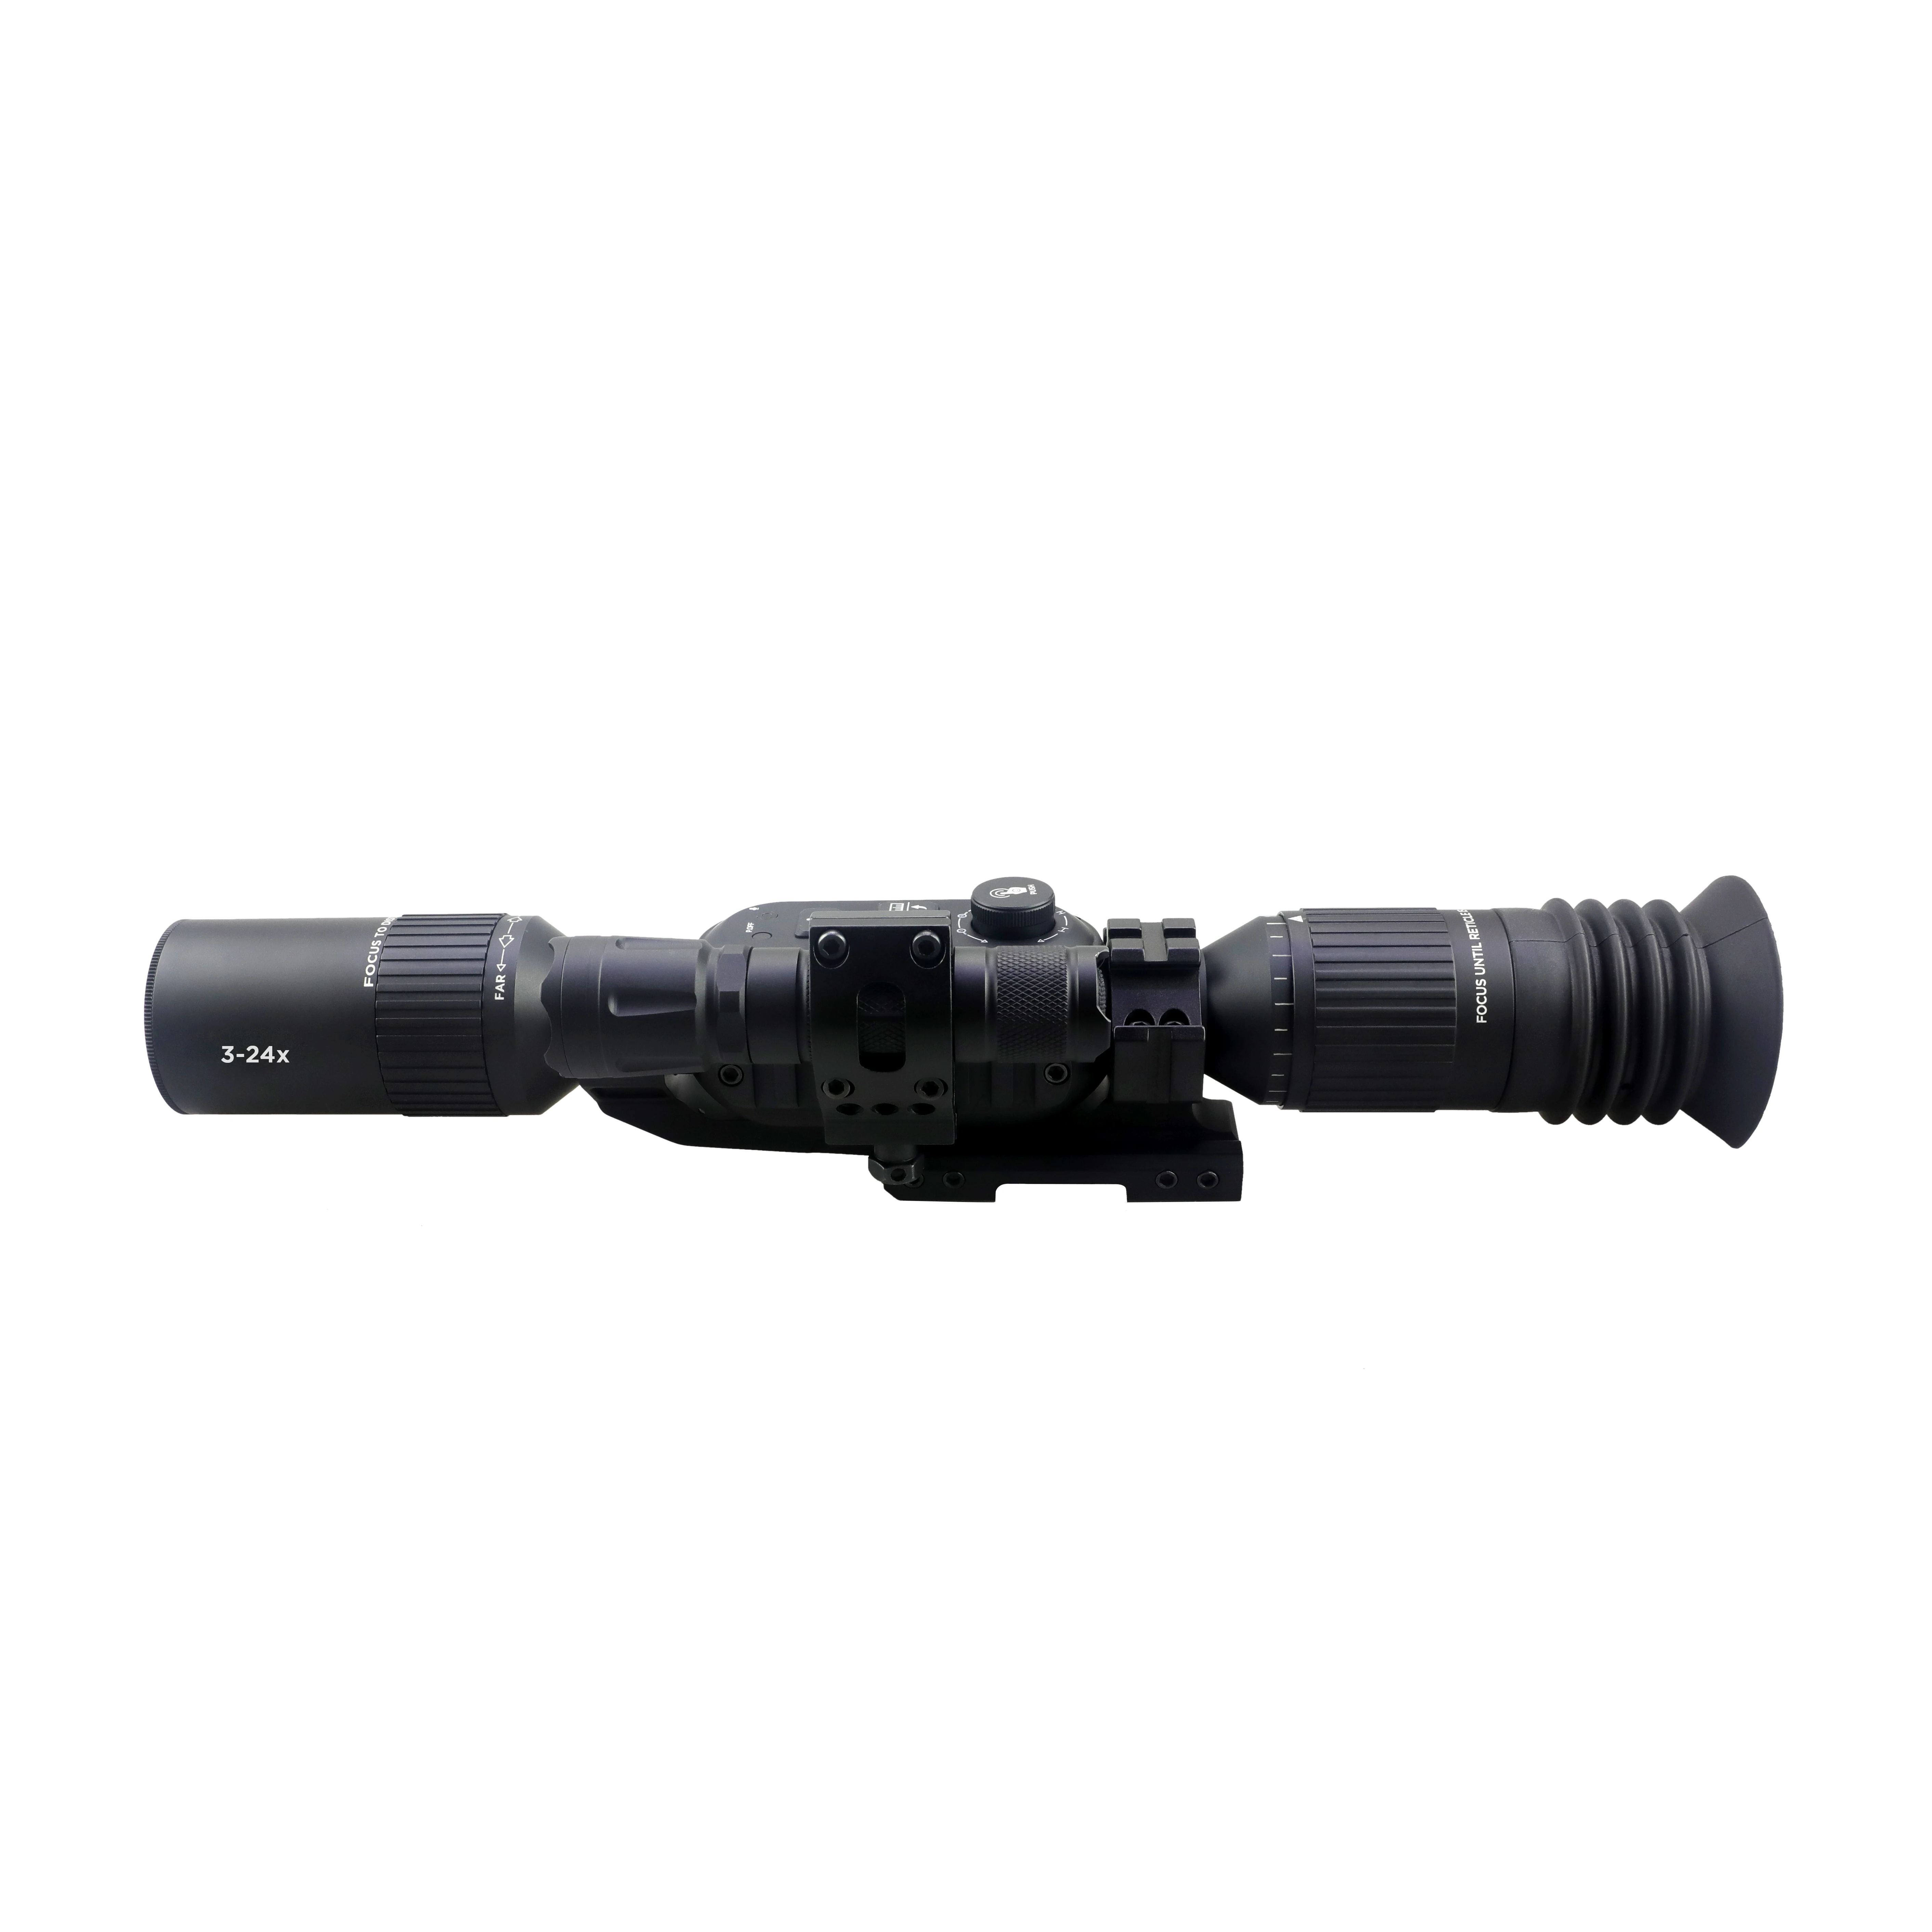 4K 3-24X High quality hunting equipment optical scope infrared night vision scope